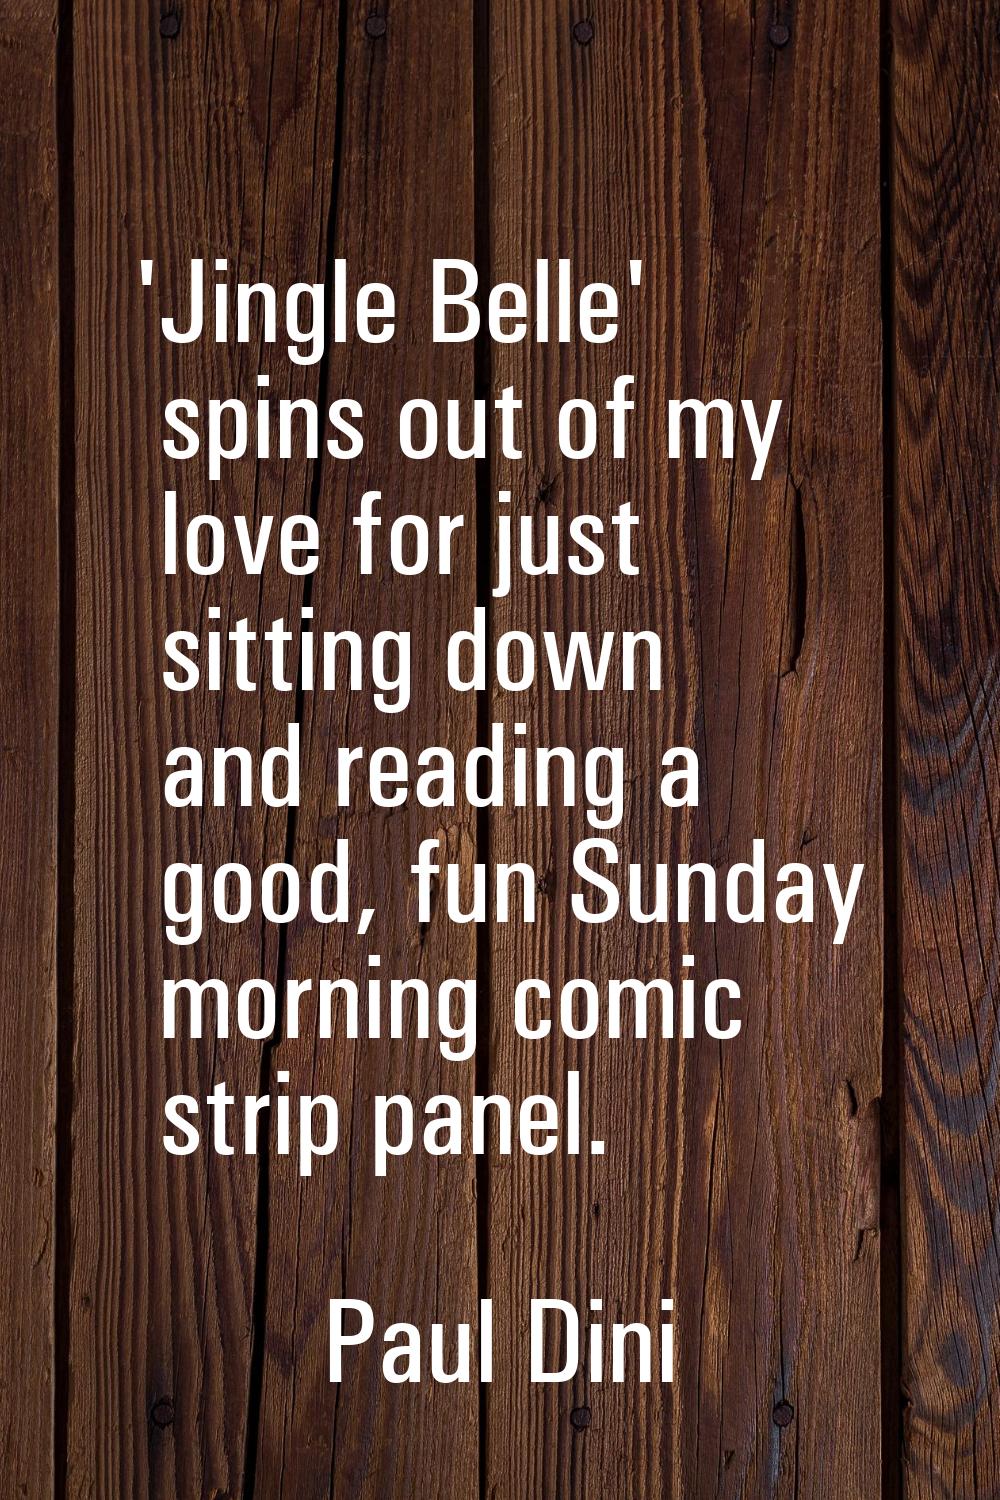 'Jingle Belle' spins out of my love for just sitting down and reading a good, fun Sunday morning co